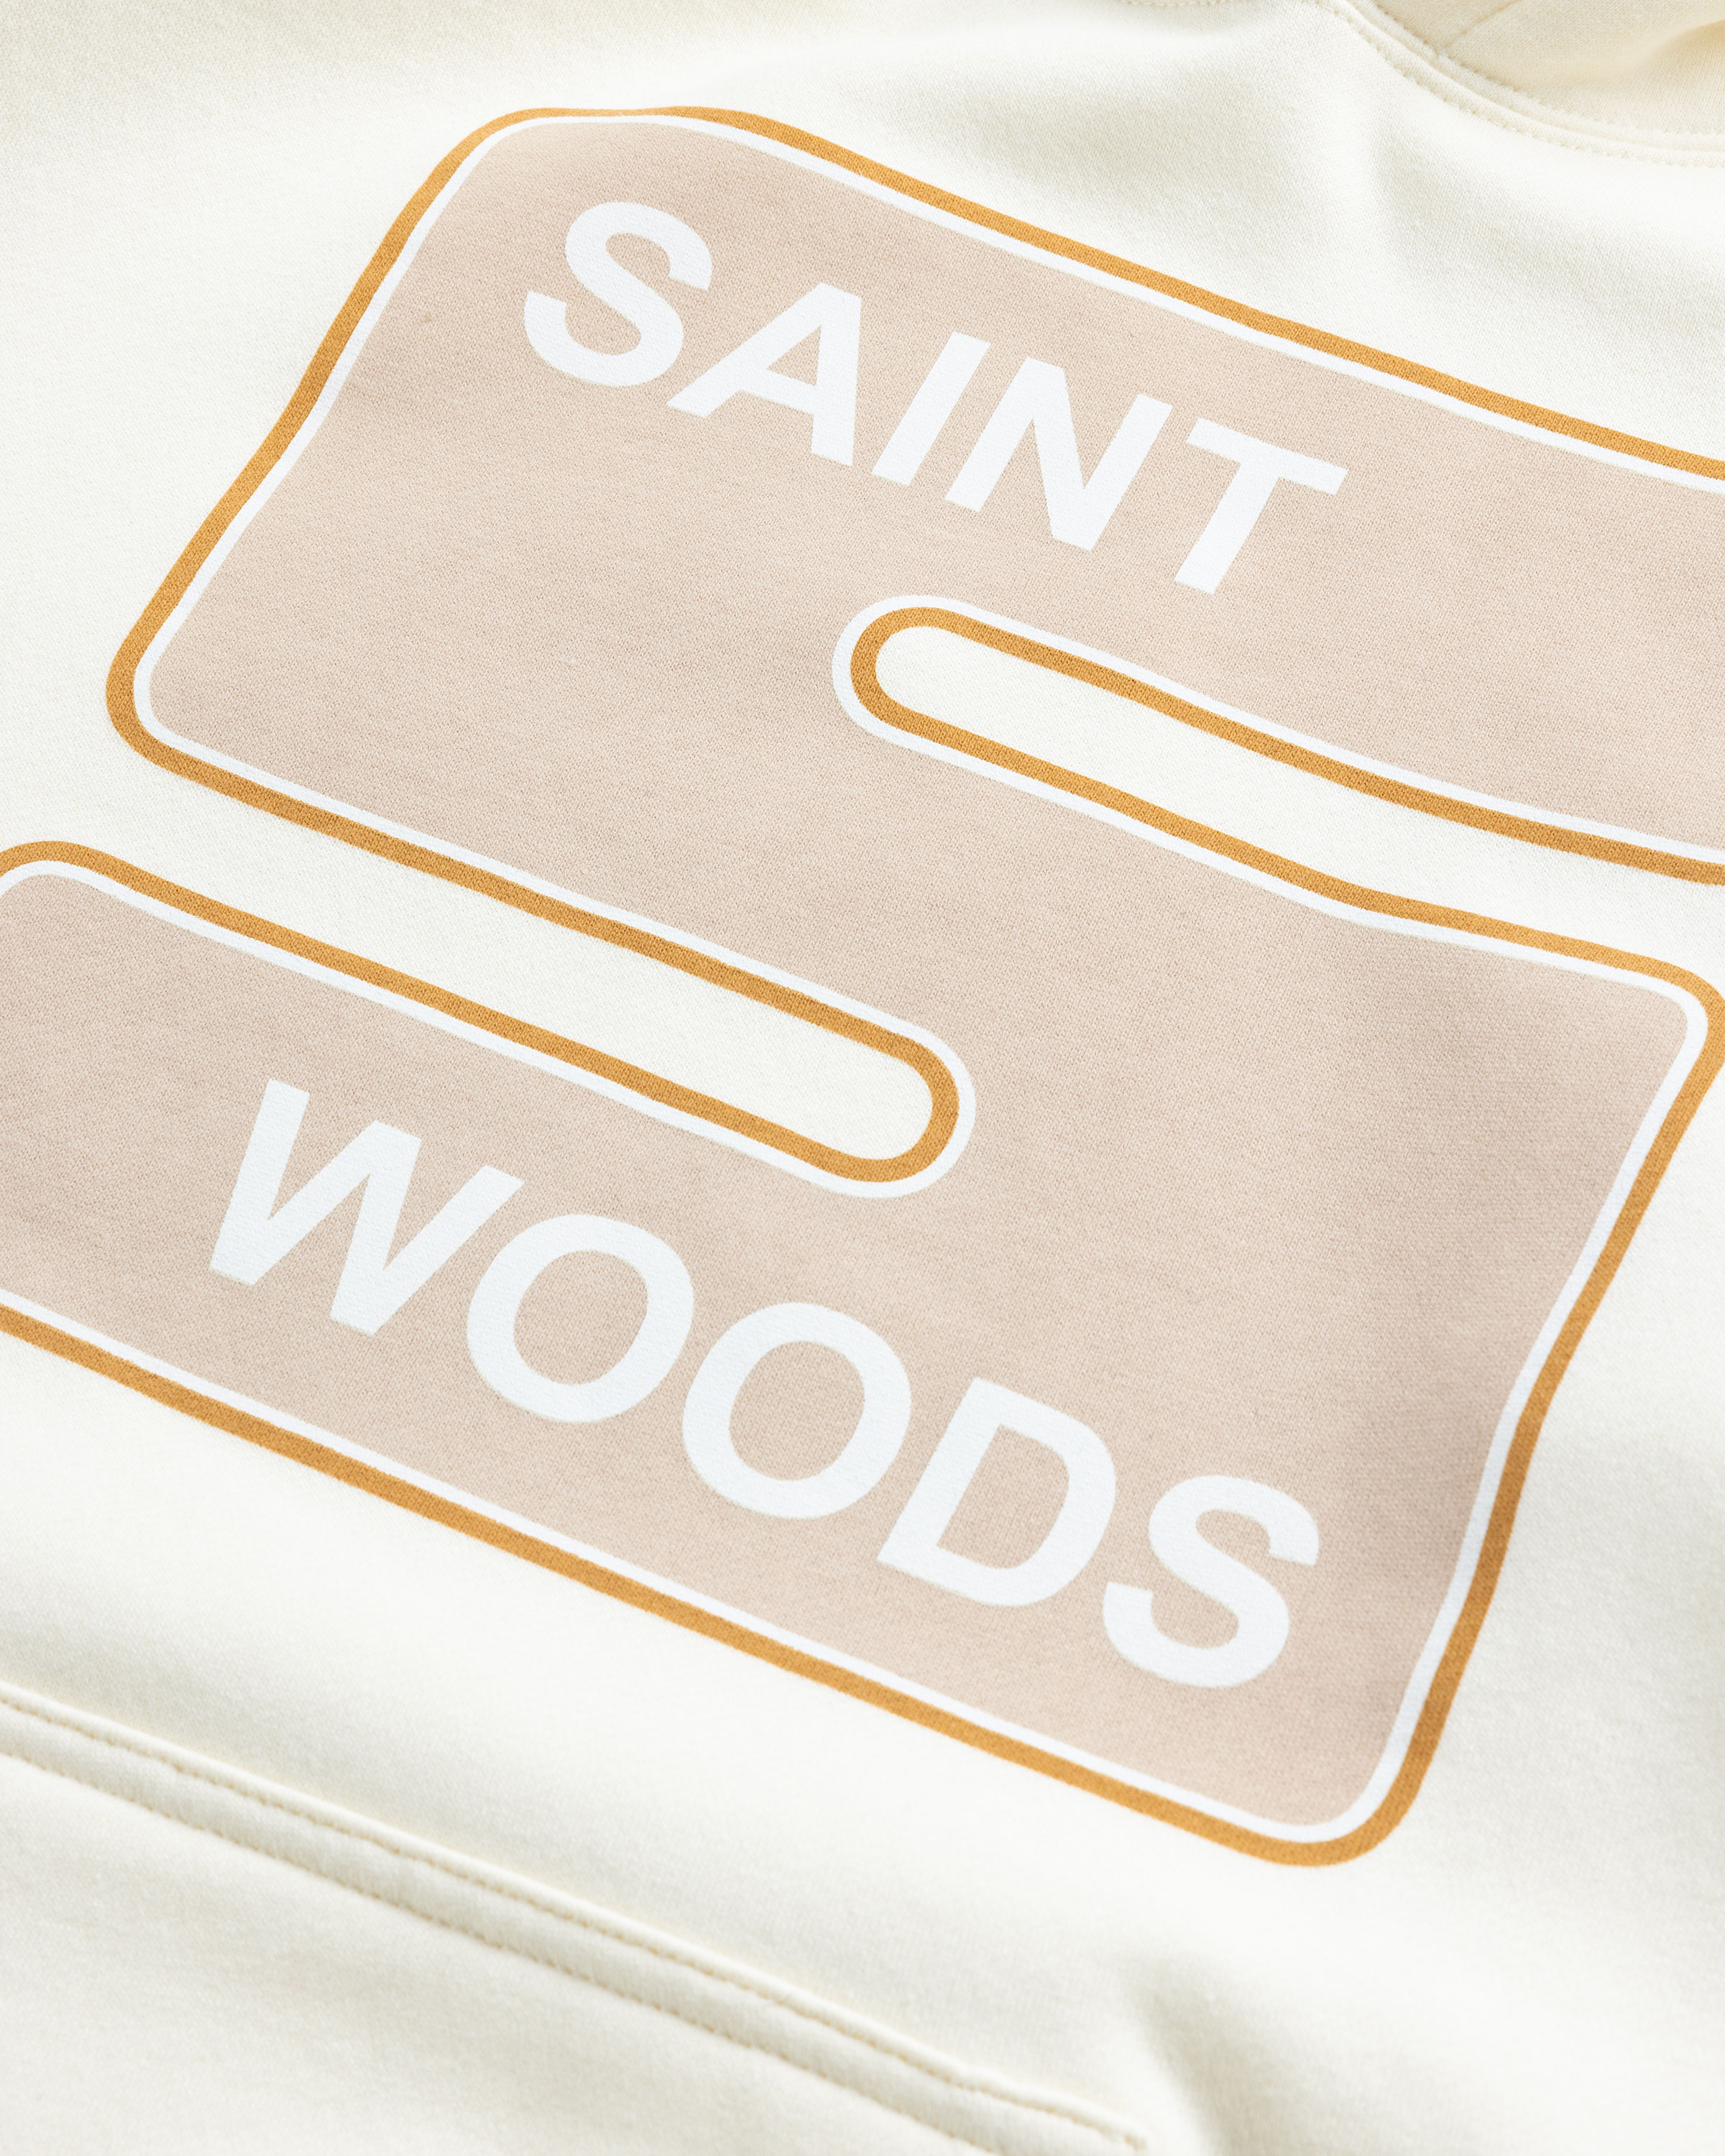 Saintwoods - You Go Hoodie Natural - Clothing - Beige - Image 6